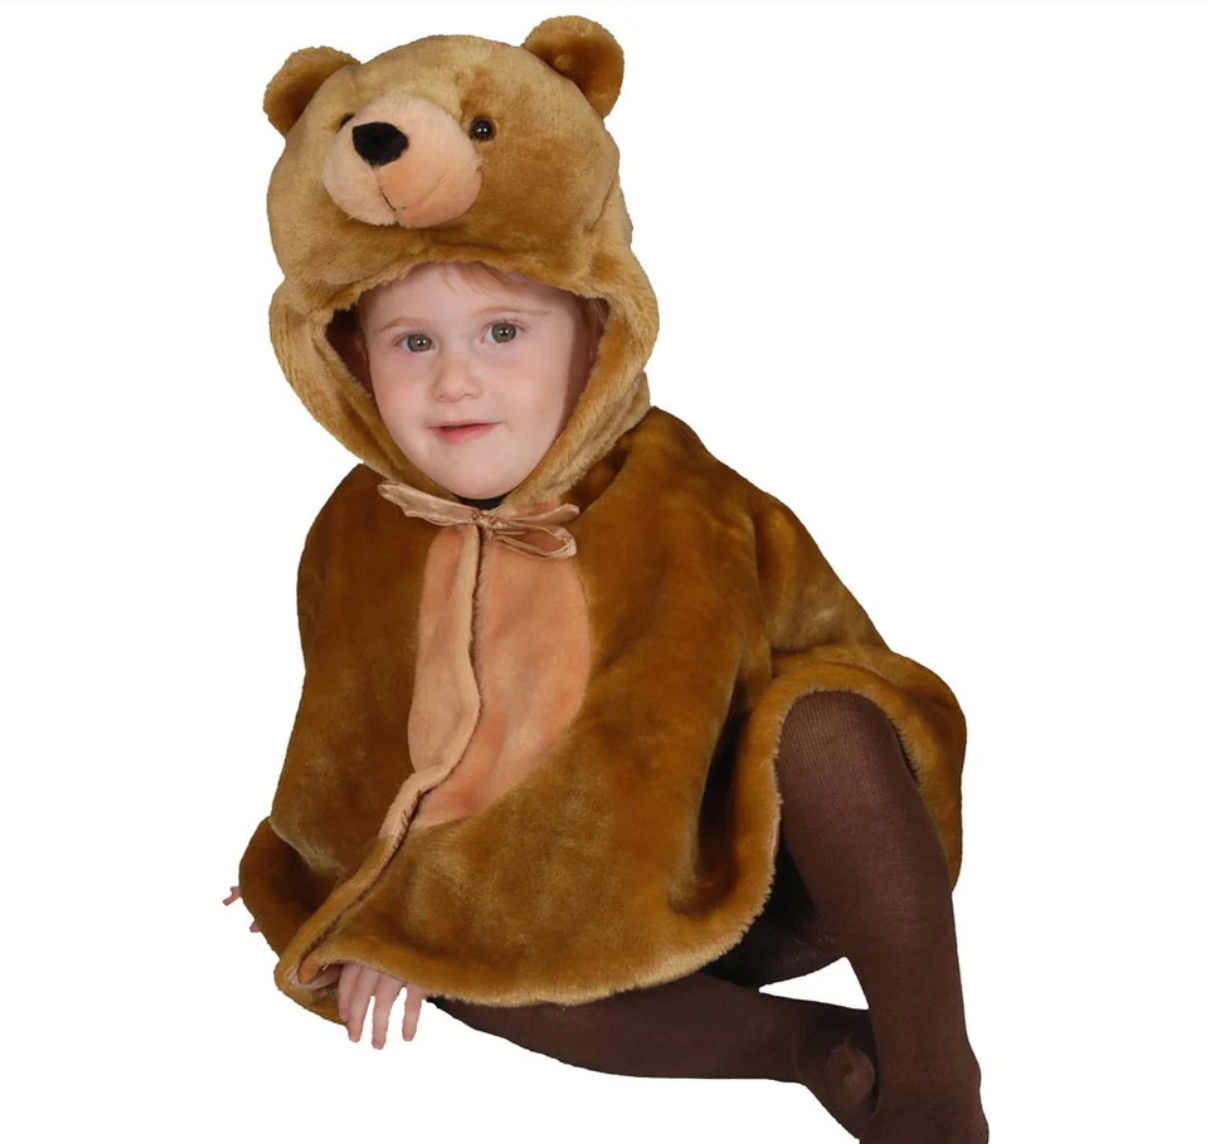 Snuggle Up with the Sweet Cuddly Little Brown Bear Costume